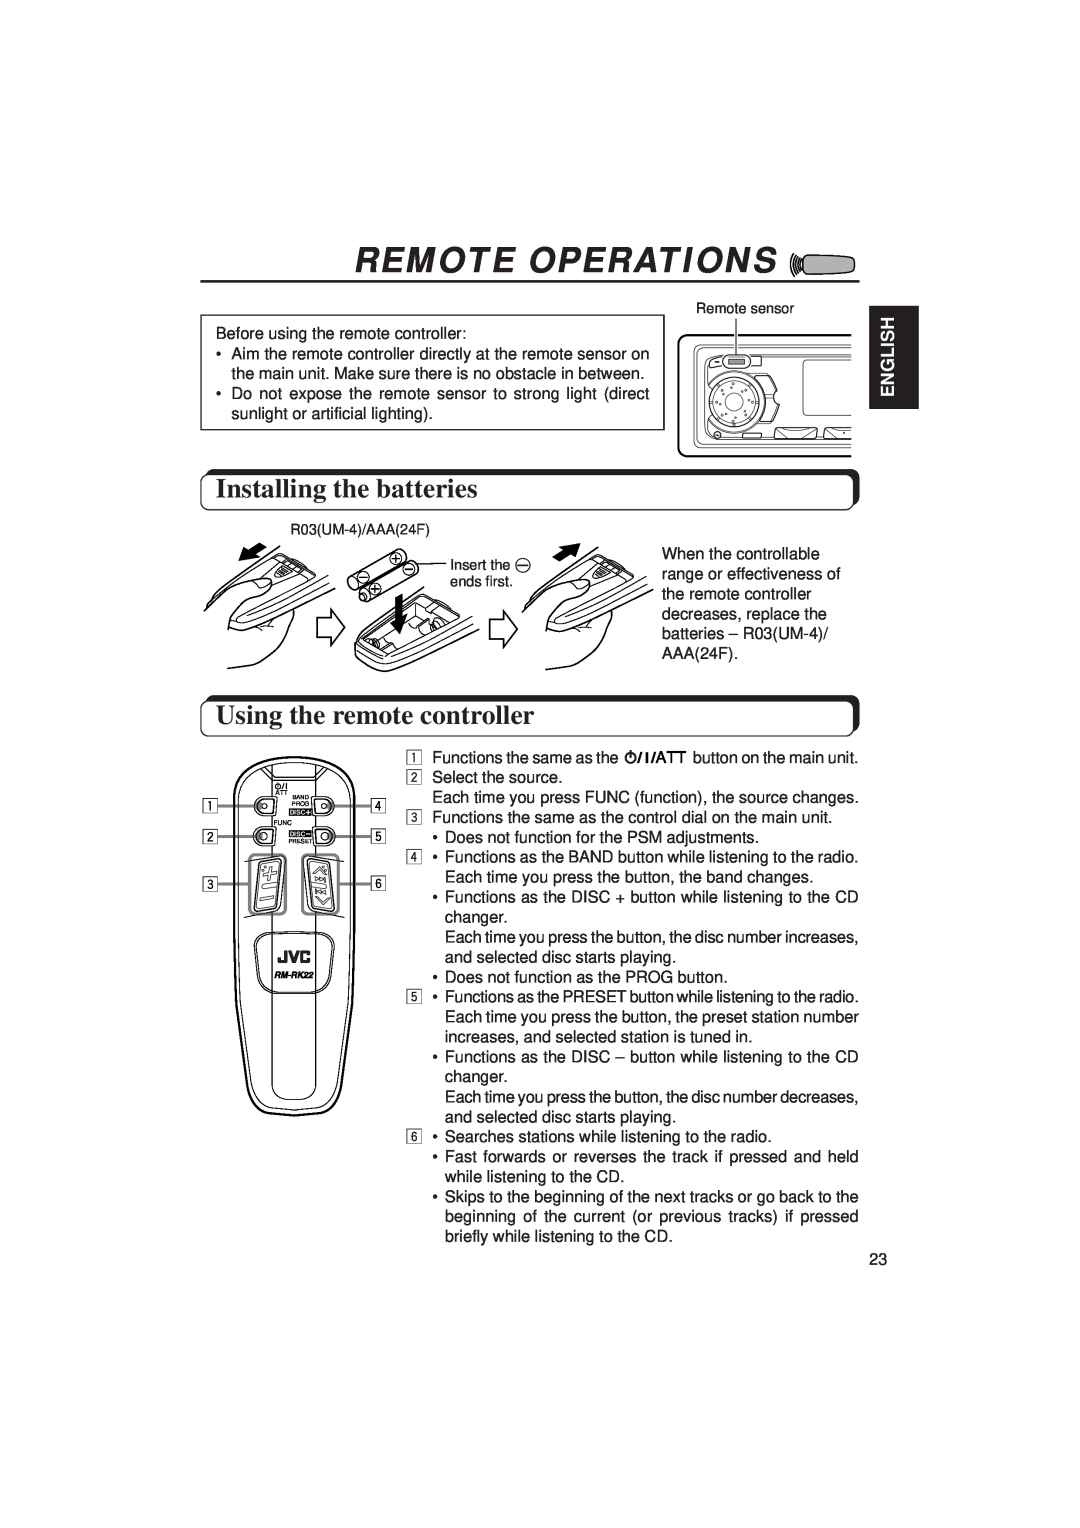 JVC KD-SX939/SX930 manual Remote Operations, Installing the batteries, Using the remote controller, English 